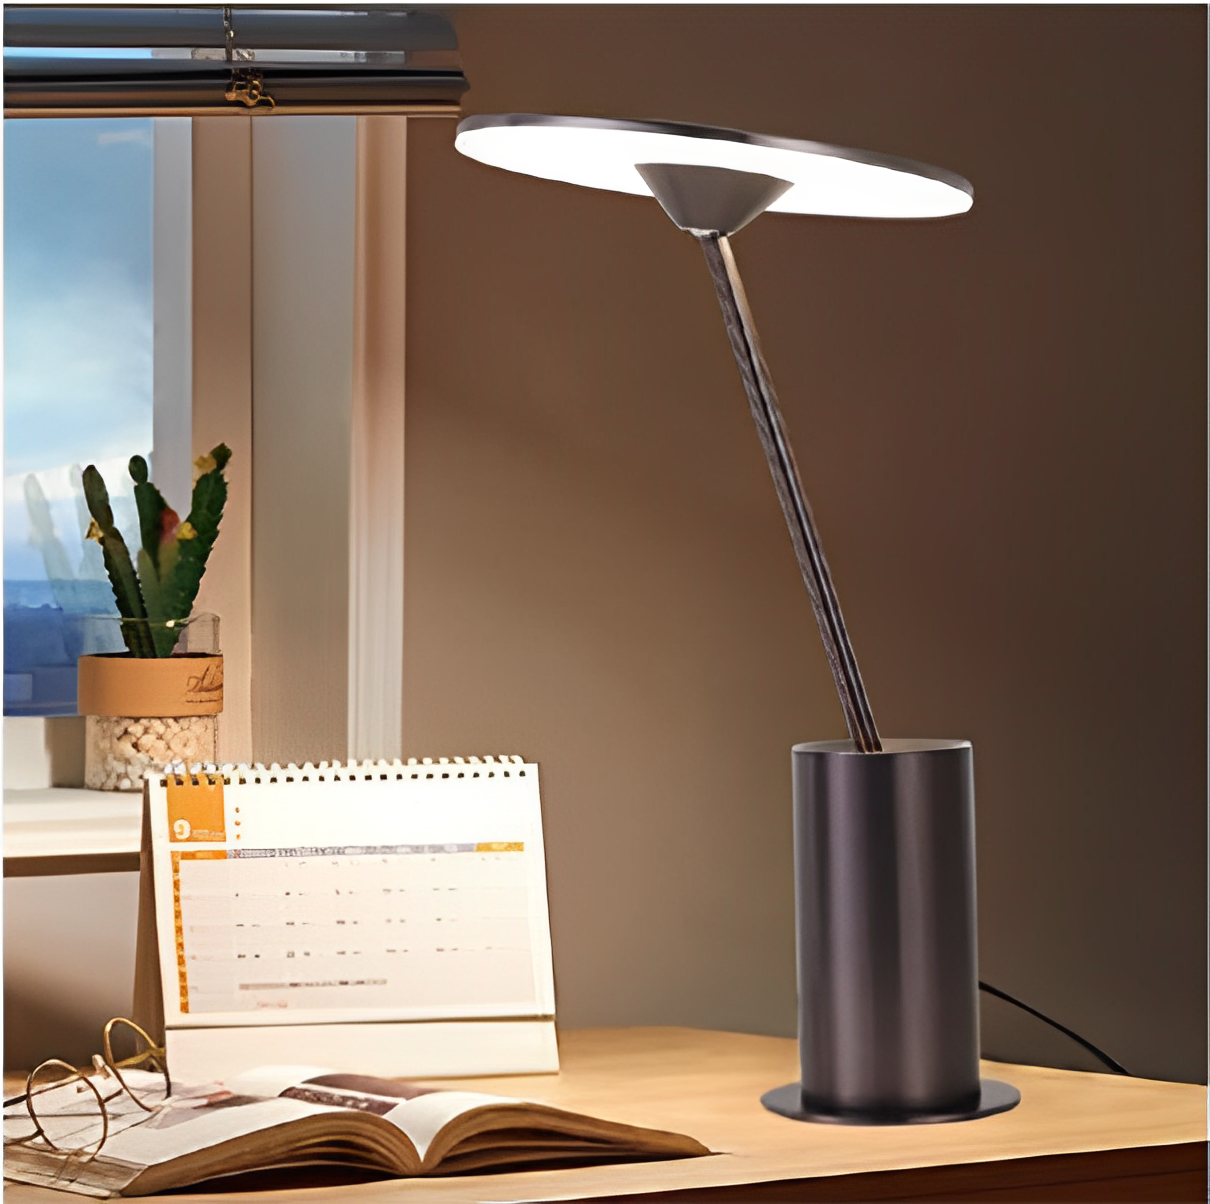 https://www.wonledlight.com/modern-creative-luxury-hotel-home-decorative-metal-base-bed-side-indoor-led-table-lamp-product/